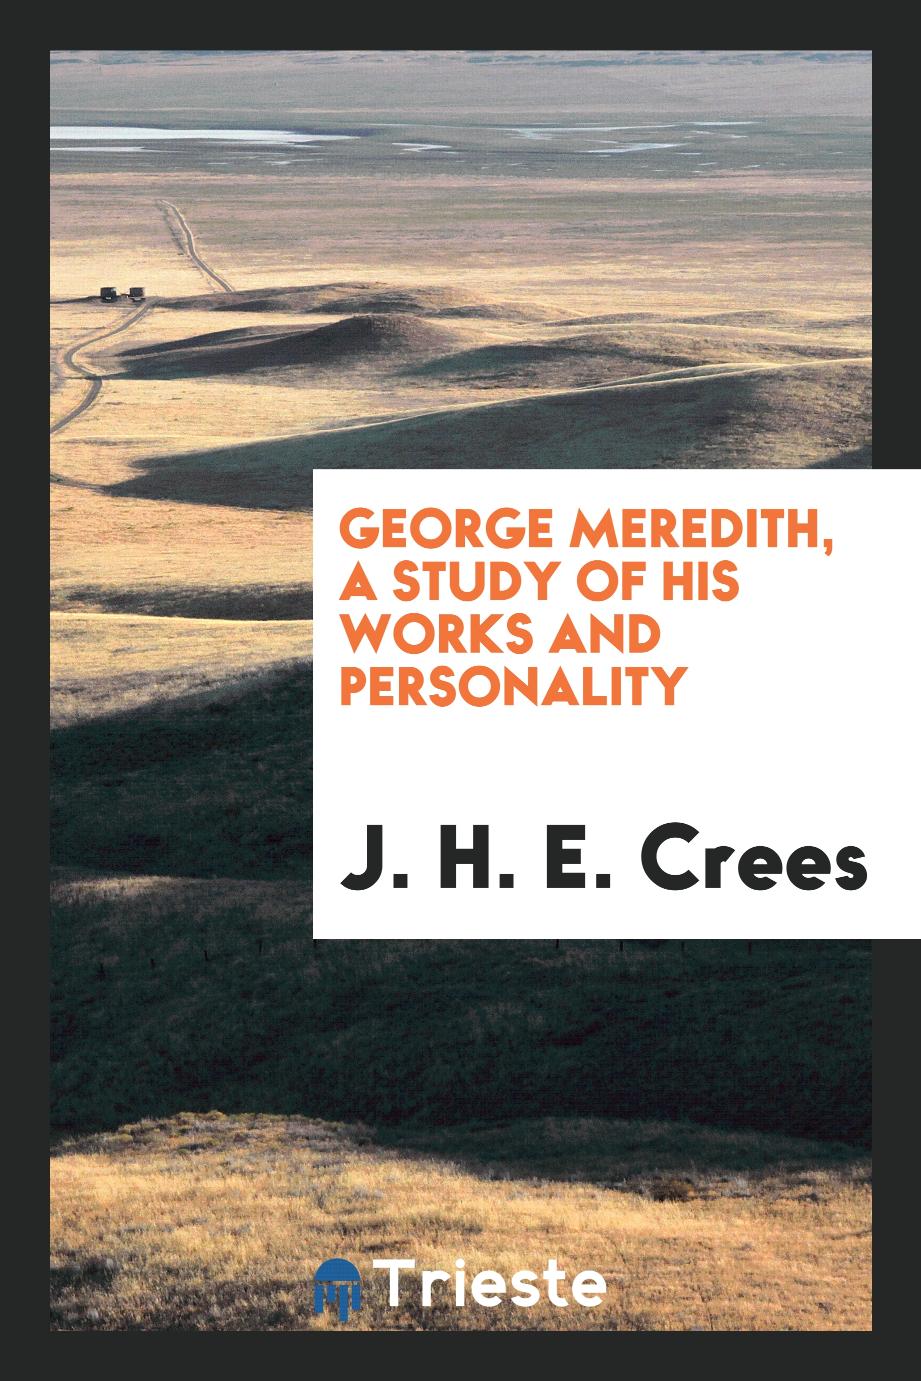 George Meredith, a study of his works and personality